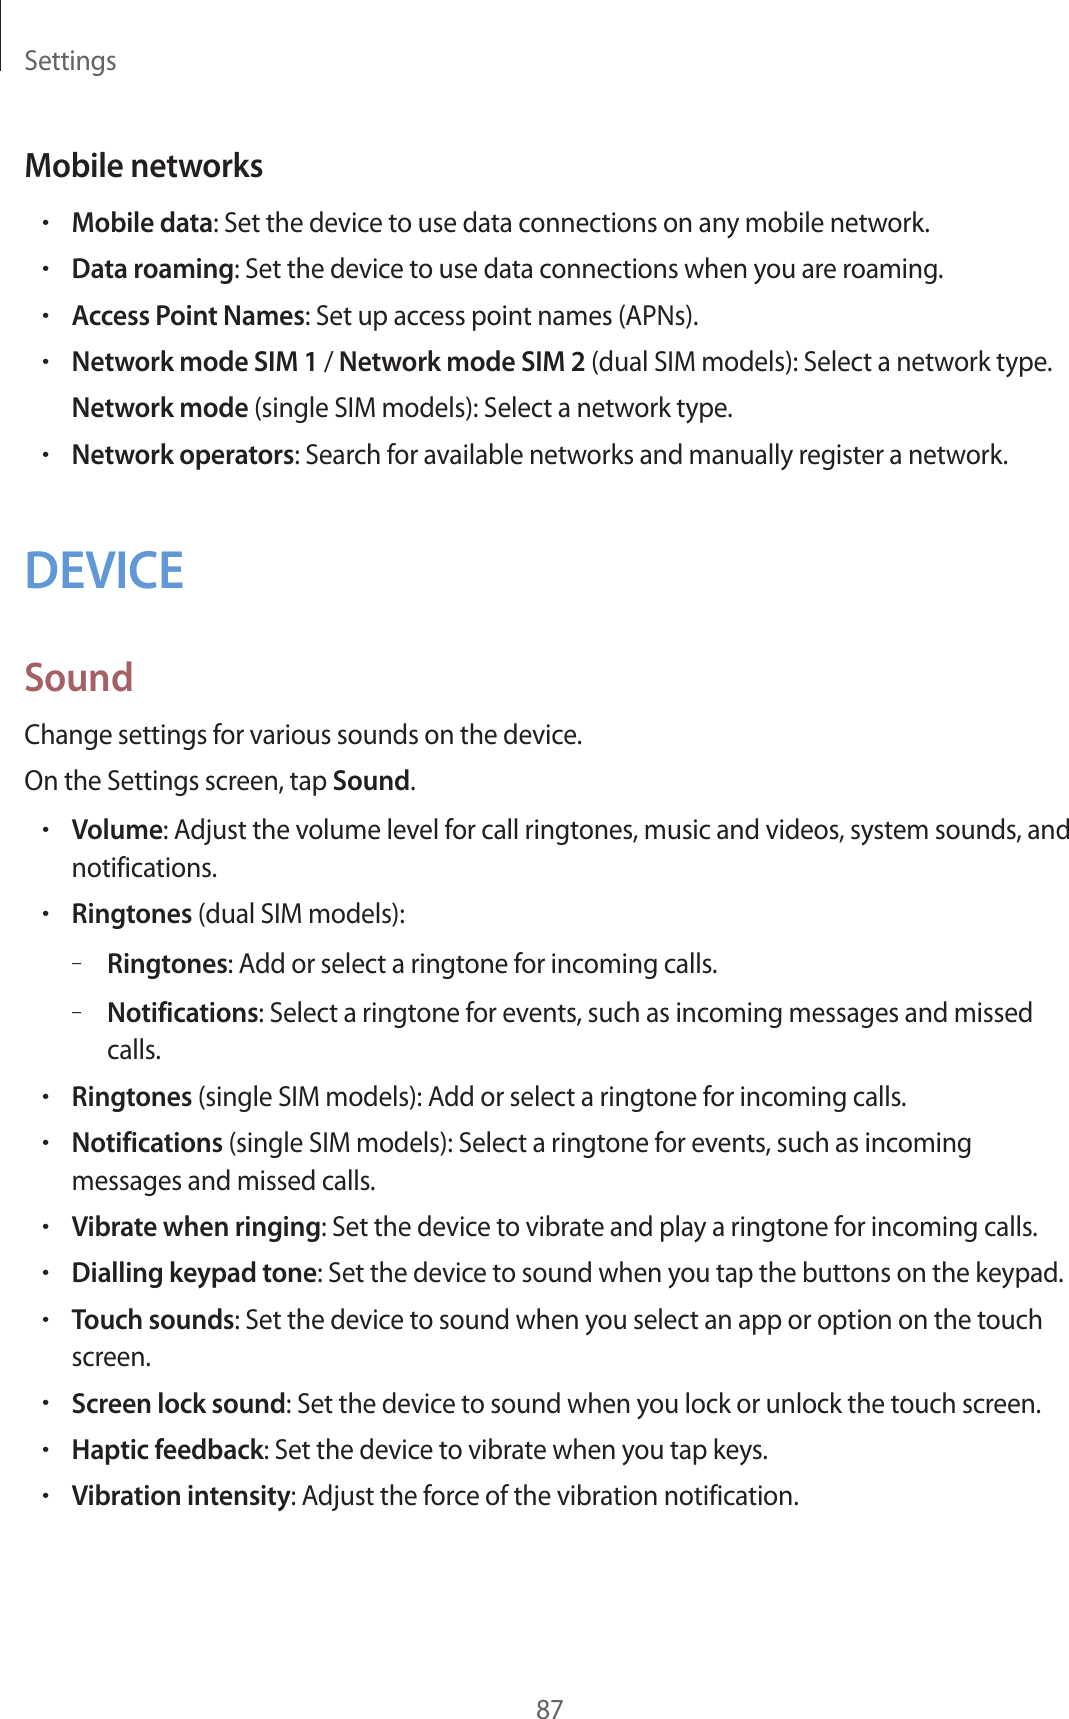 Settings87Mobile networks•Mobile data: Set the device to use data connections on any mobile network.•Data roaming: Set the device to use data connections when you are roaming.•Access Point Names: Set up access point names (APNs).•Network mode SIM 1 / Network mode SIM 2 (dual SIM models): Select a network type.Network mode (single SIM models): Select a network type.•Network operators: Search for available networks and manually register a network.DEVICESoundChange settings for various sounds on the device.On the Settings screen, tap Sound.•Volume: Adjust the volume level for call ringtones, music and videos, system sounds, and notifications.•Ringtones (dual SIM models):–Ringtones: Add or select a ringtone for incoming calls.–Notifications: Select a ringtone for events, such as incoming messages and missed calls.•Ringtones (single SIM models): Add or select a ringtone for incoming calls.•Notifications (single SIM models): Select a ringtone for events, such as incoming messages and missed calls.•Vibrate when ringing: Set the device to vibrate and play a ringtone for incoming calls.•Dialling keypad tone: Set the device to sound when you tap the buttons on the keypad.•Touch sounds: Set the device to sound when you select an app or option on the touch screen.•Screen lock sound: Set the device to sound when you lock or unlock the touch screen.•Haptic feedback: Set the device to vibrate when you tap keys.•Vibration intensity: Adjust the force of the vibration notification.